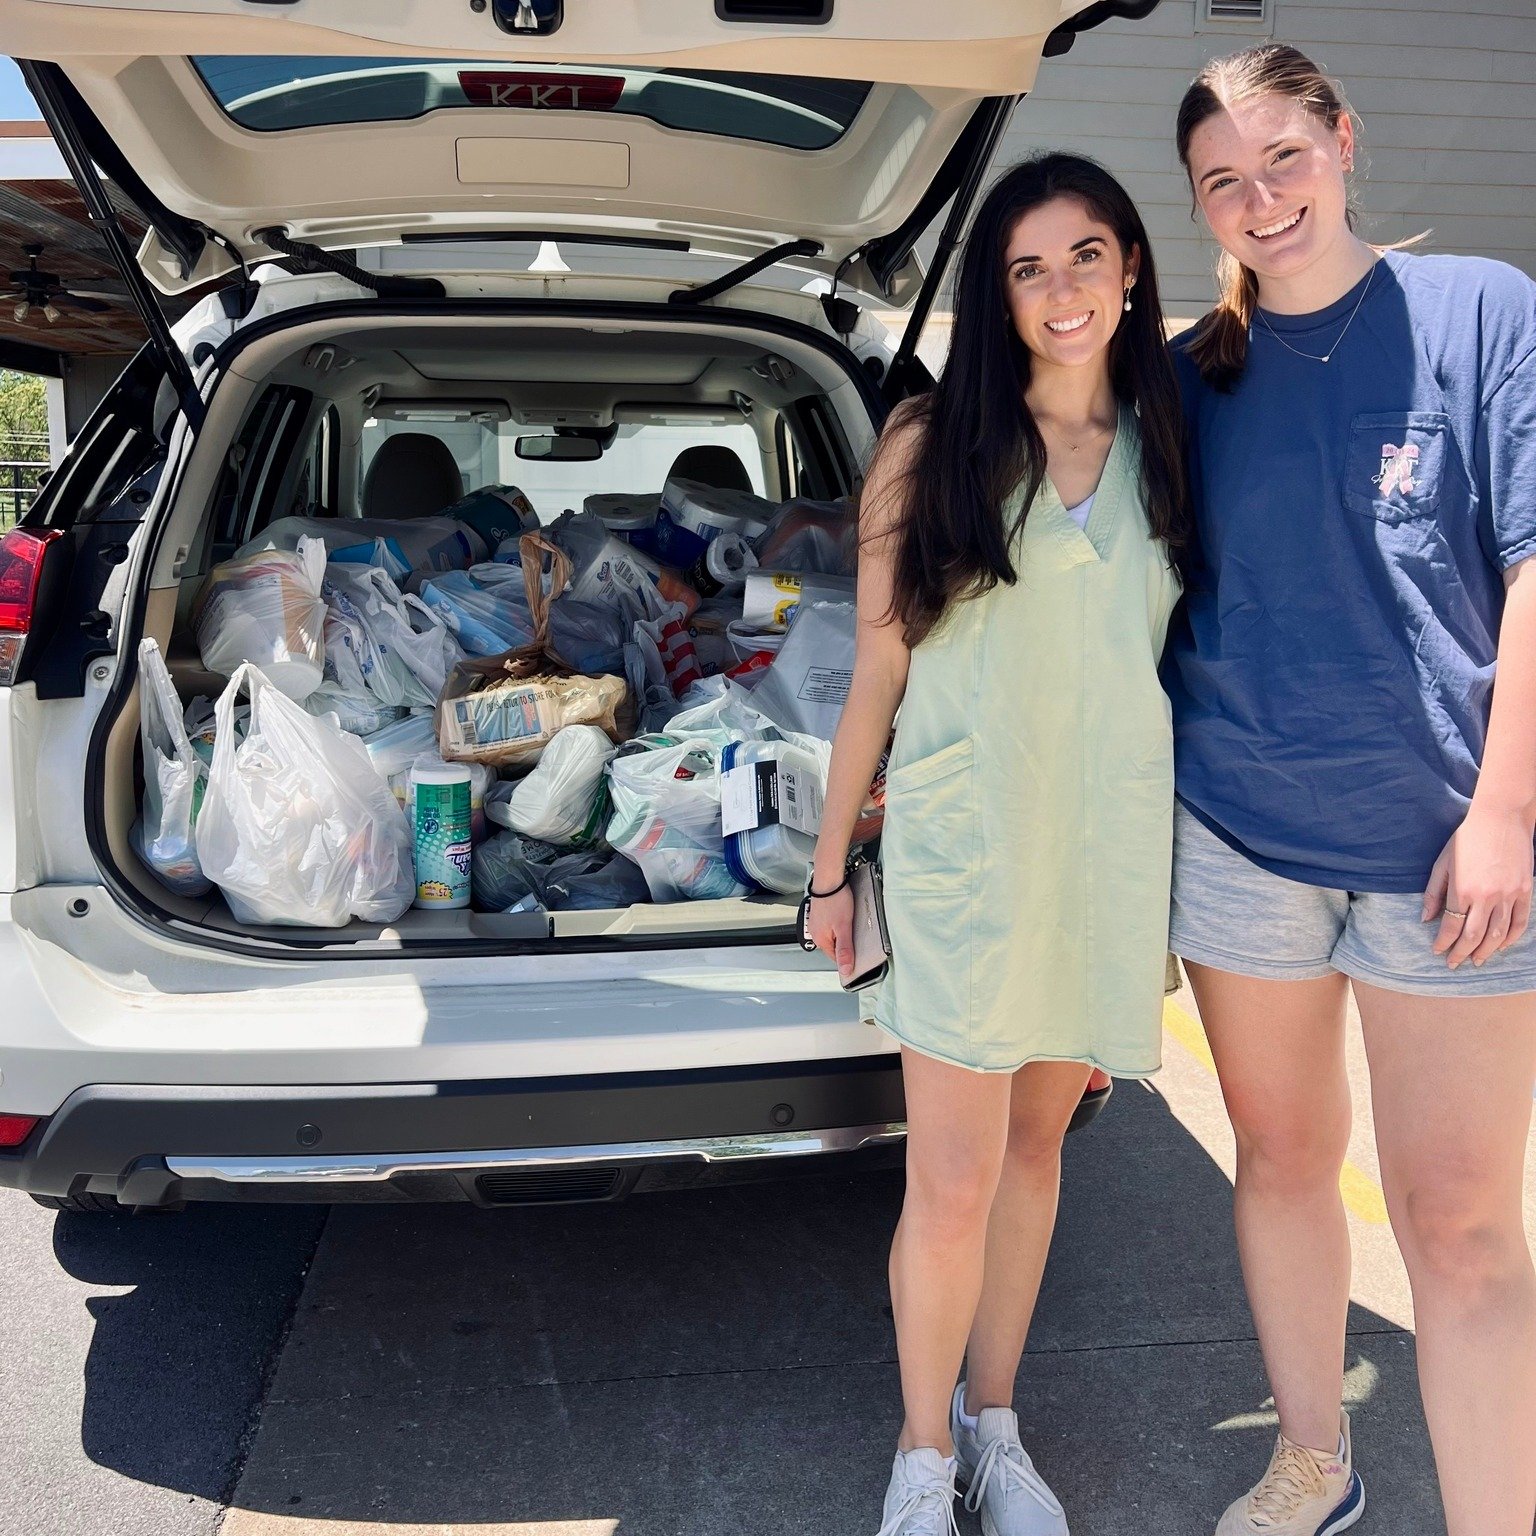 A BIG thank you to our friends at U of A Kappa Kappa Gamma for dropping off donations for &quot;Grace!&quot; We love seeing students giving back to the community in BIG ways! 

Thank you for being a LIGHT for &quot;Grace!&quot;✨

@uarkansas @kappakap